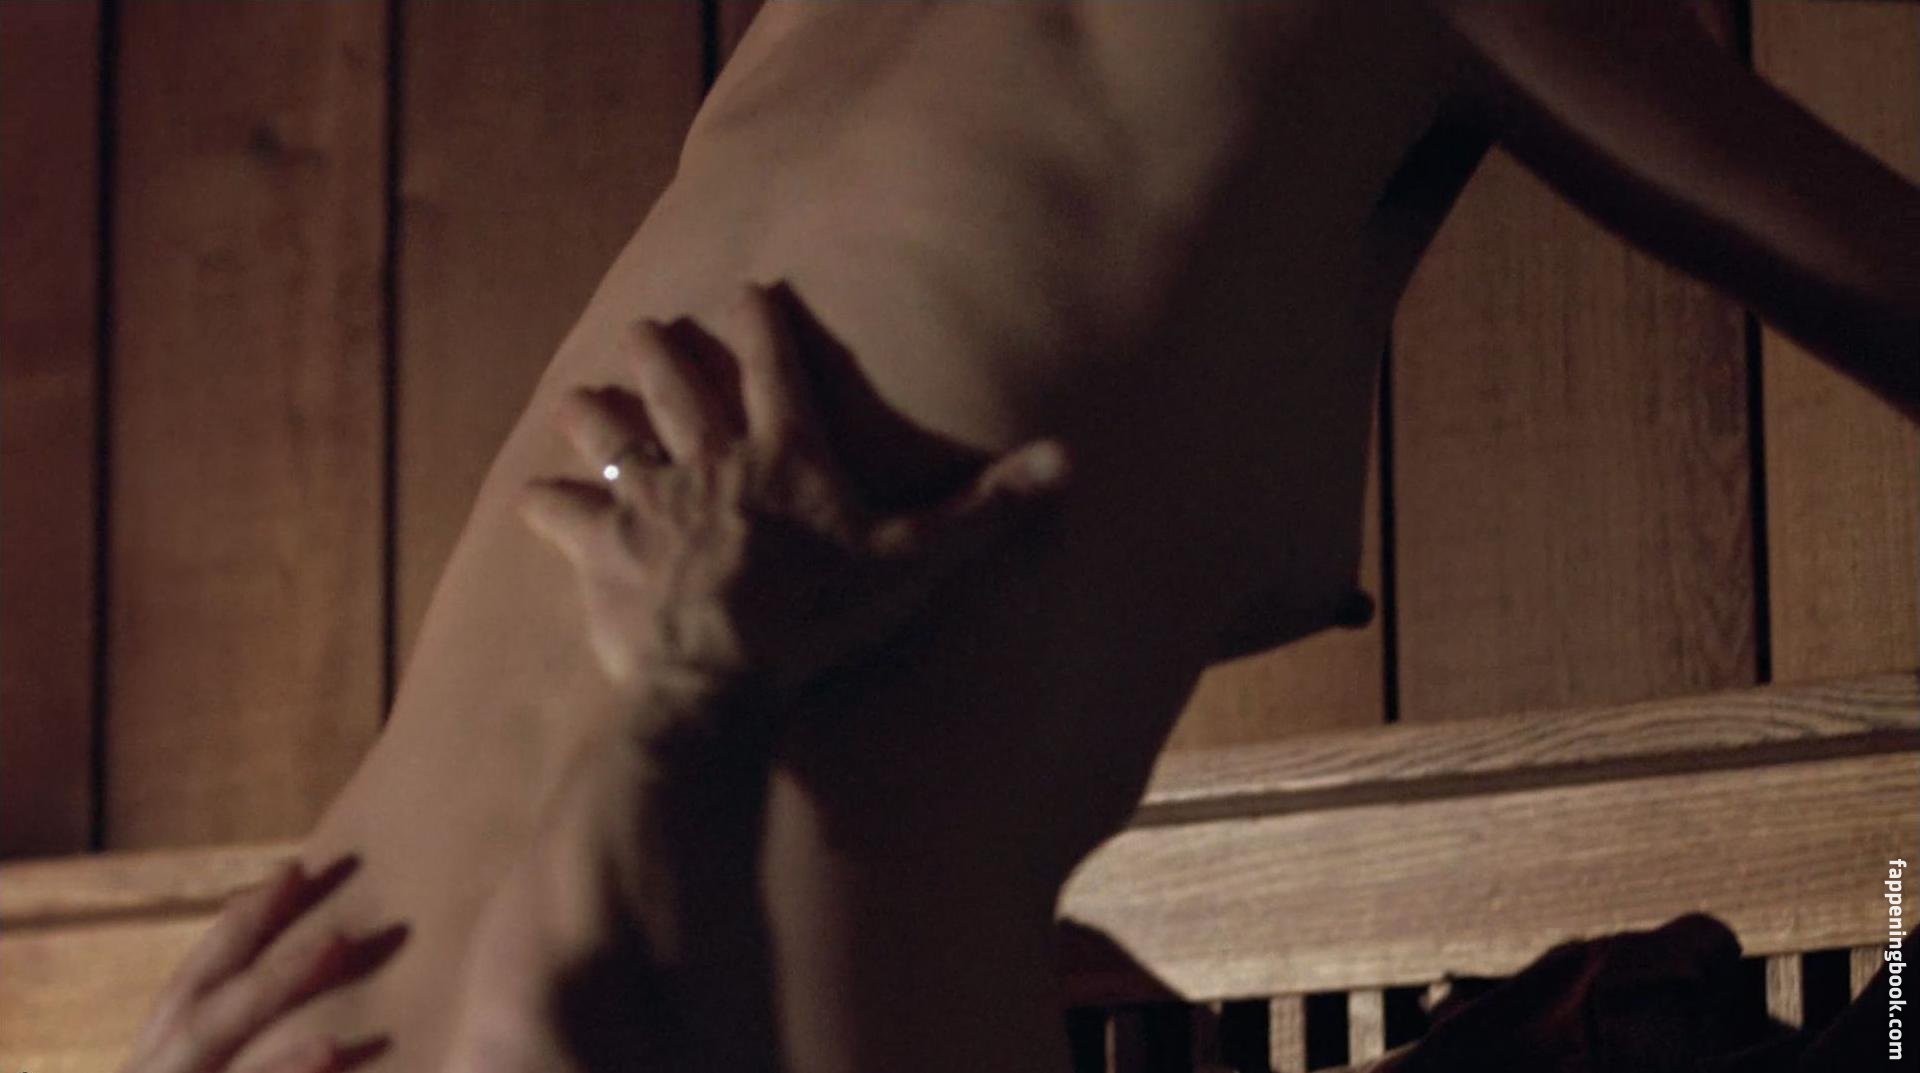 embeth davidtz nude sorted by. relevance. 